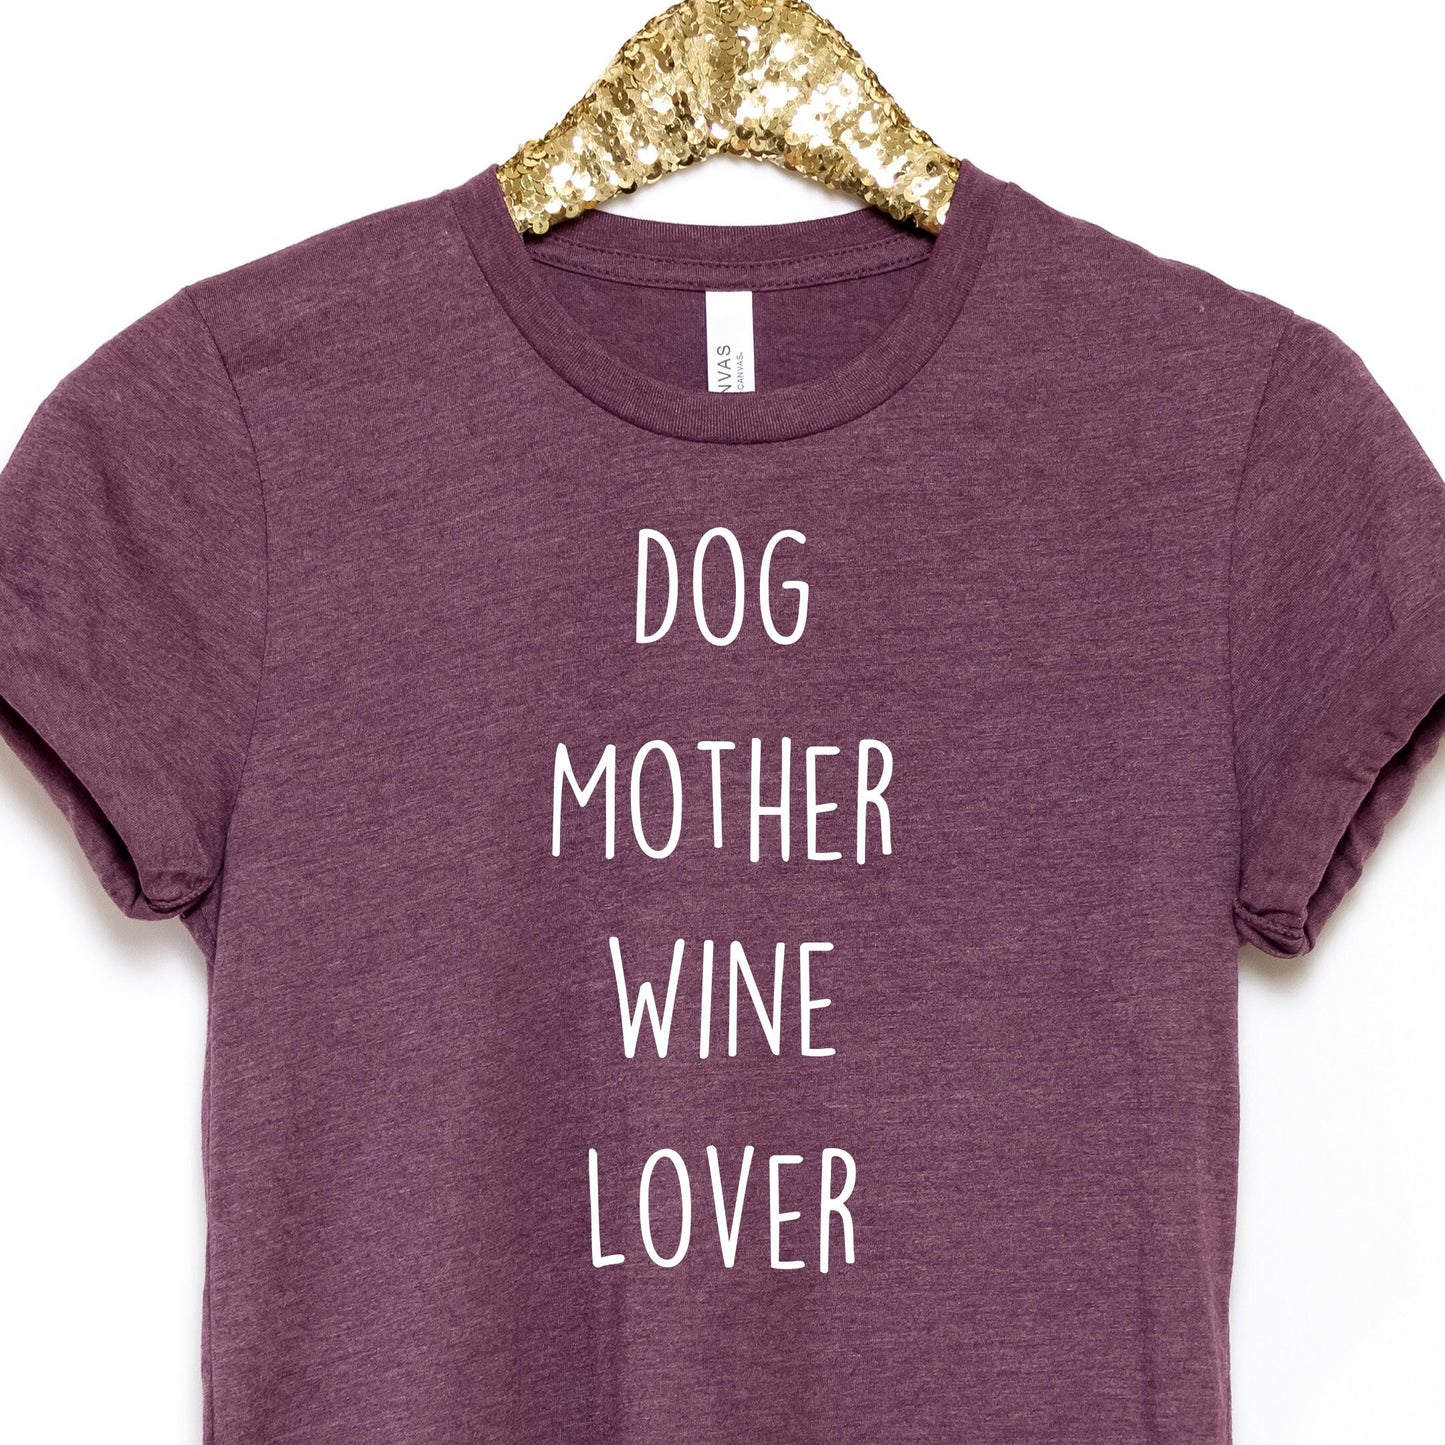 Dog Shirt, Wine Shirt, Dog Wine Shirt, Wine Gifts, Dog Lover Gifts